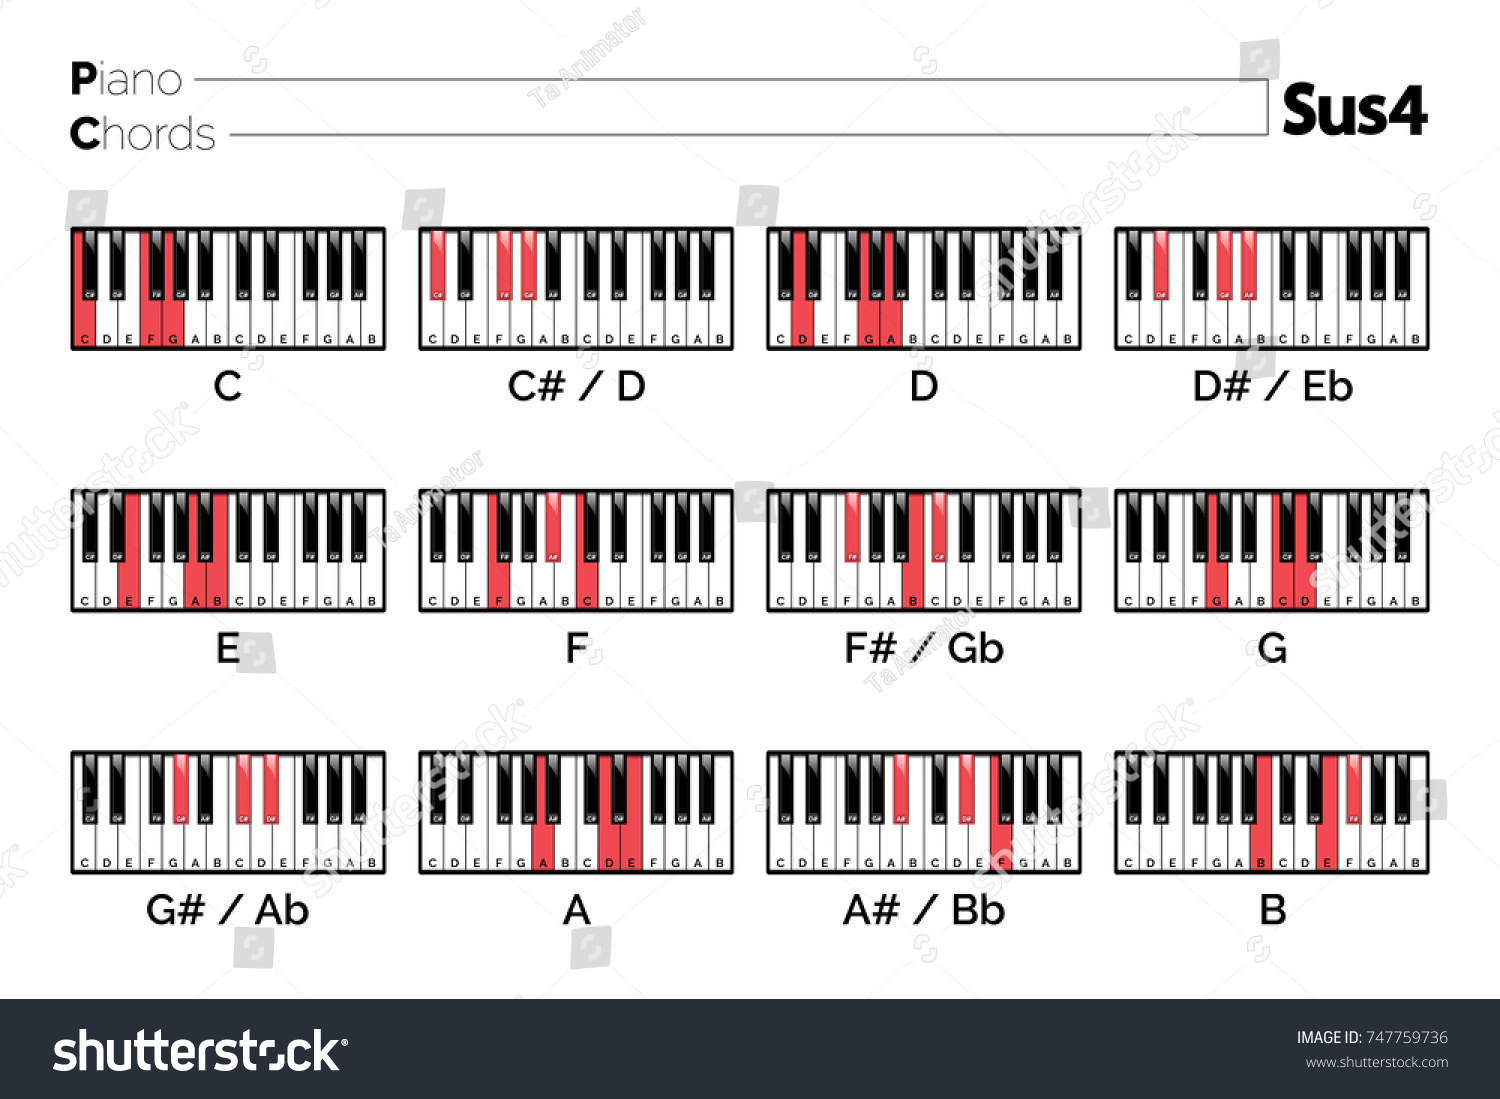 Piano Chord Sus4 Chart Graphic Music Stock Vector Royalty Free